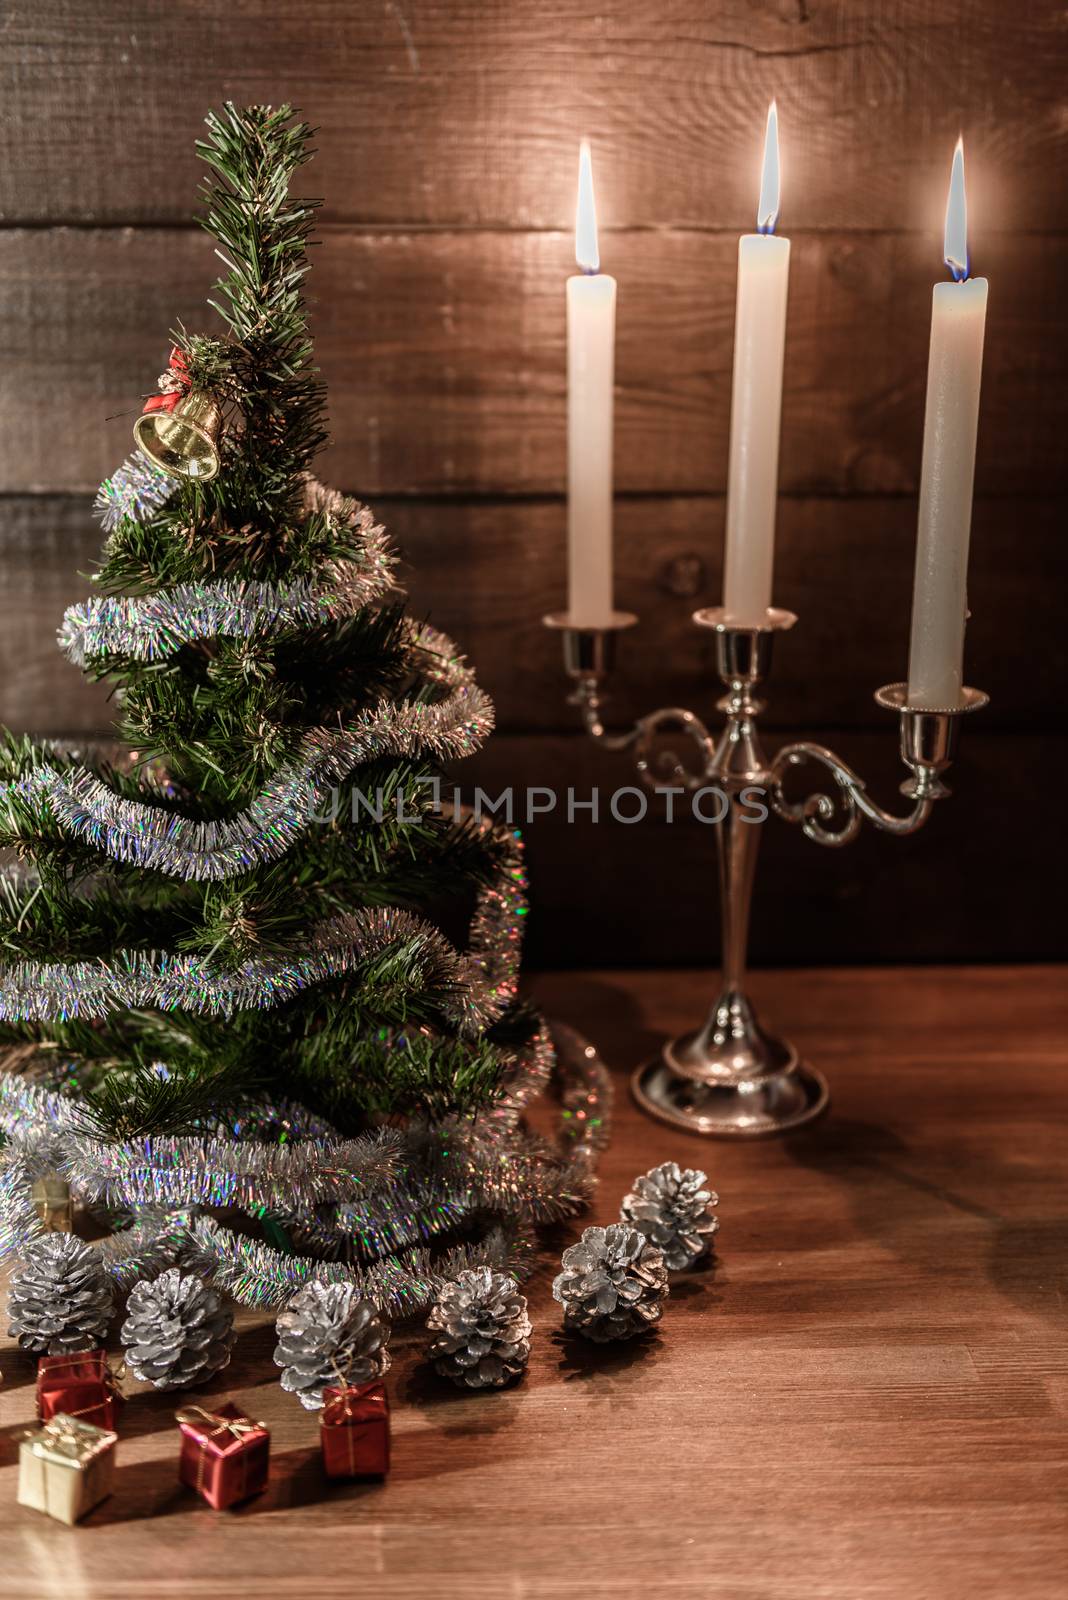 Christmas decorative tree by Andreua